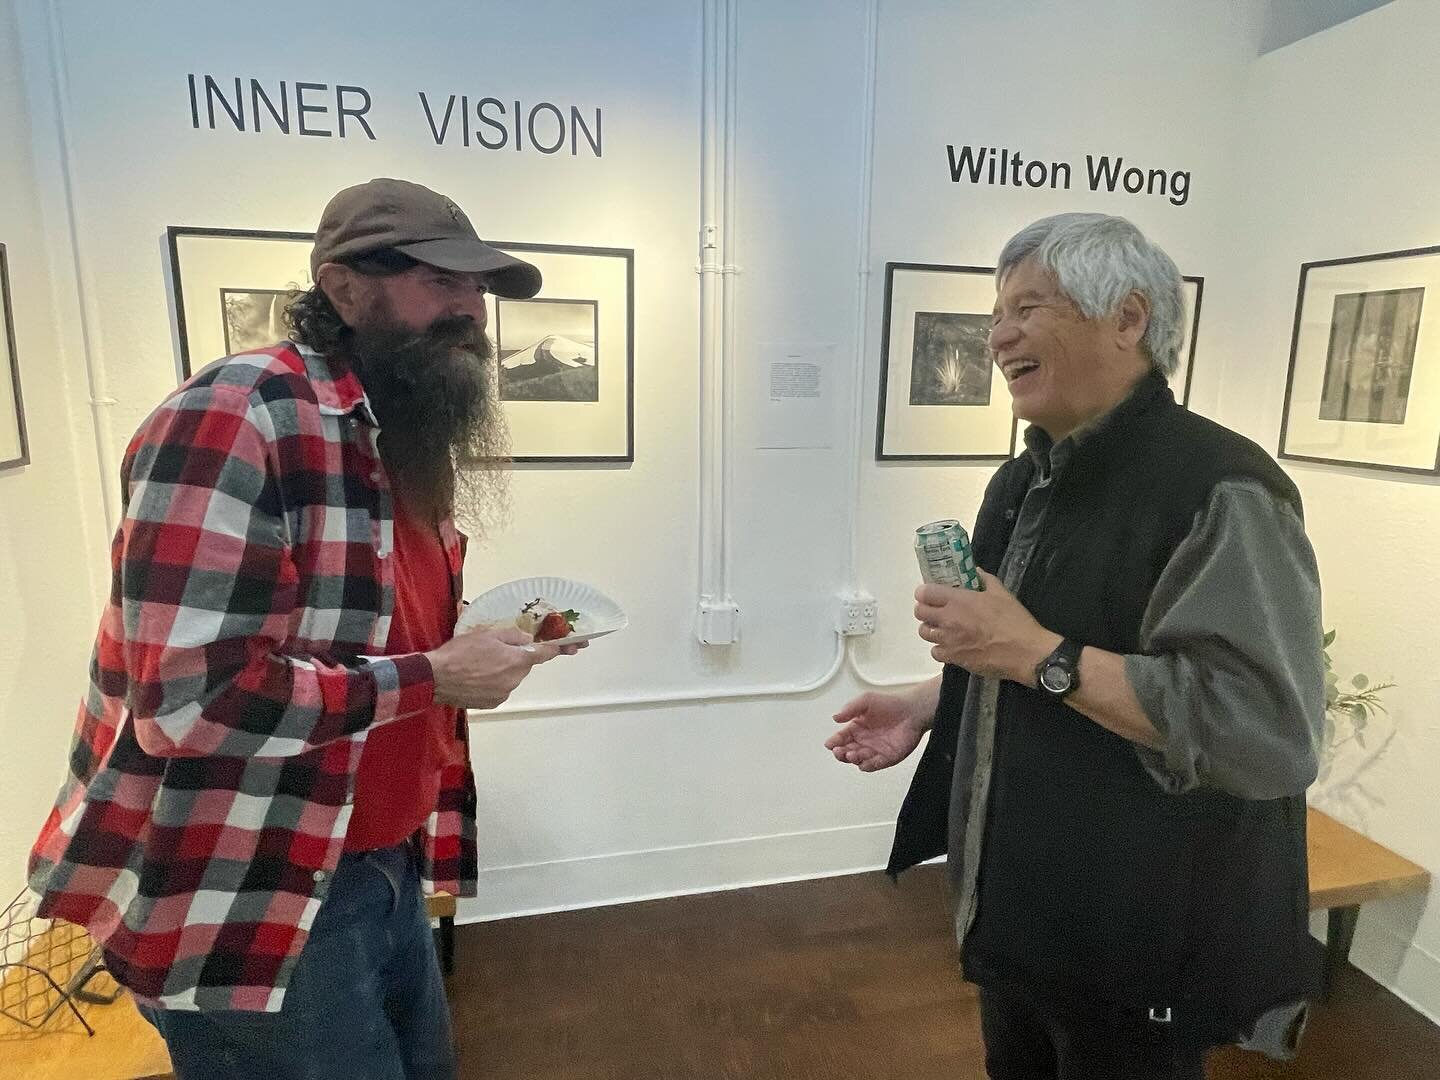 Big thanks to guest artist Wilton Wong (http://wiltonwong.net/) and everyone who participated and joined us for a festive, fun, and frenzied opening reception this past weekend! 

Come by any time we&rsquo;re open (M-Sat, noon to 4pm) to check out so